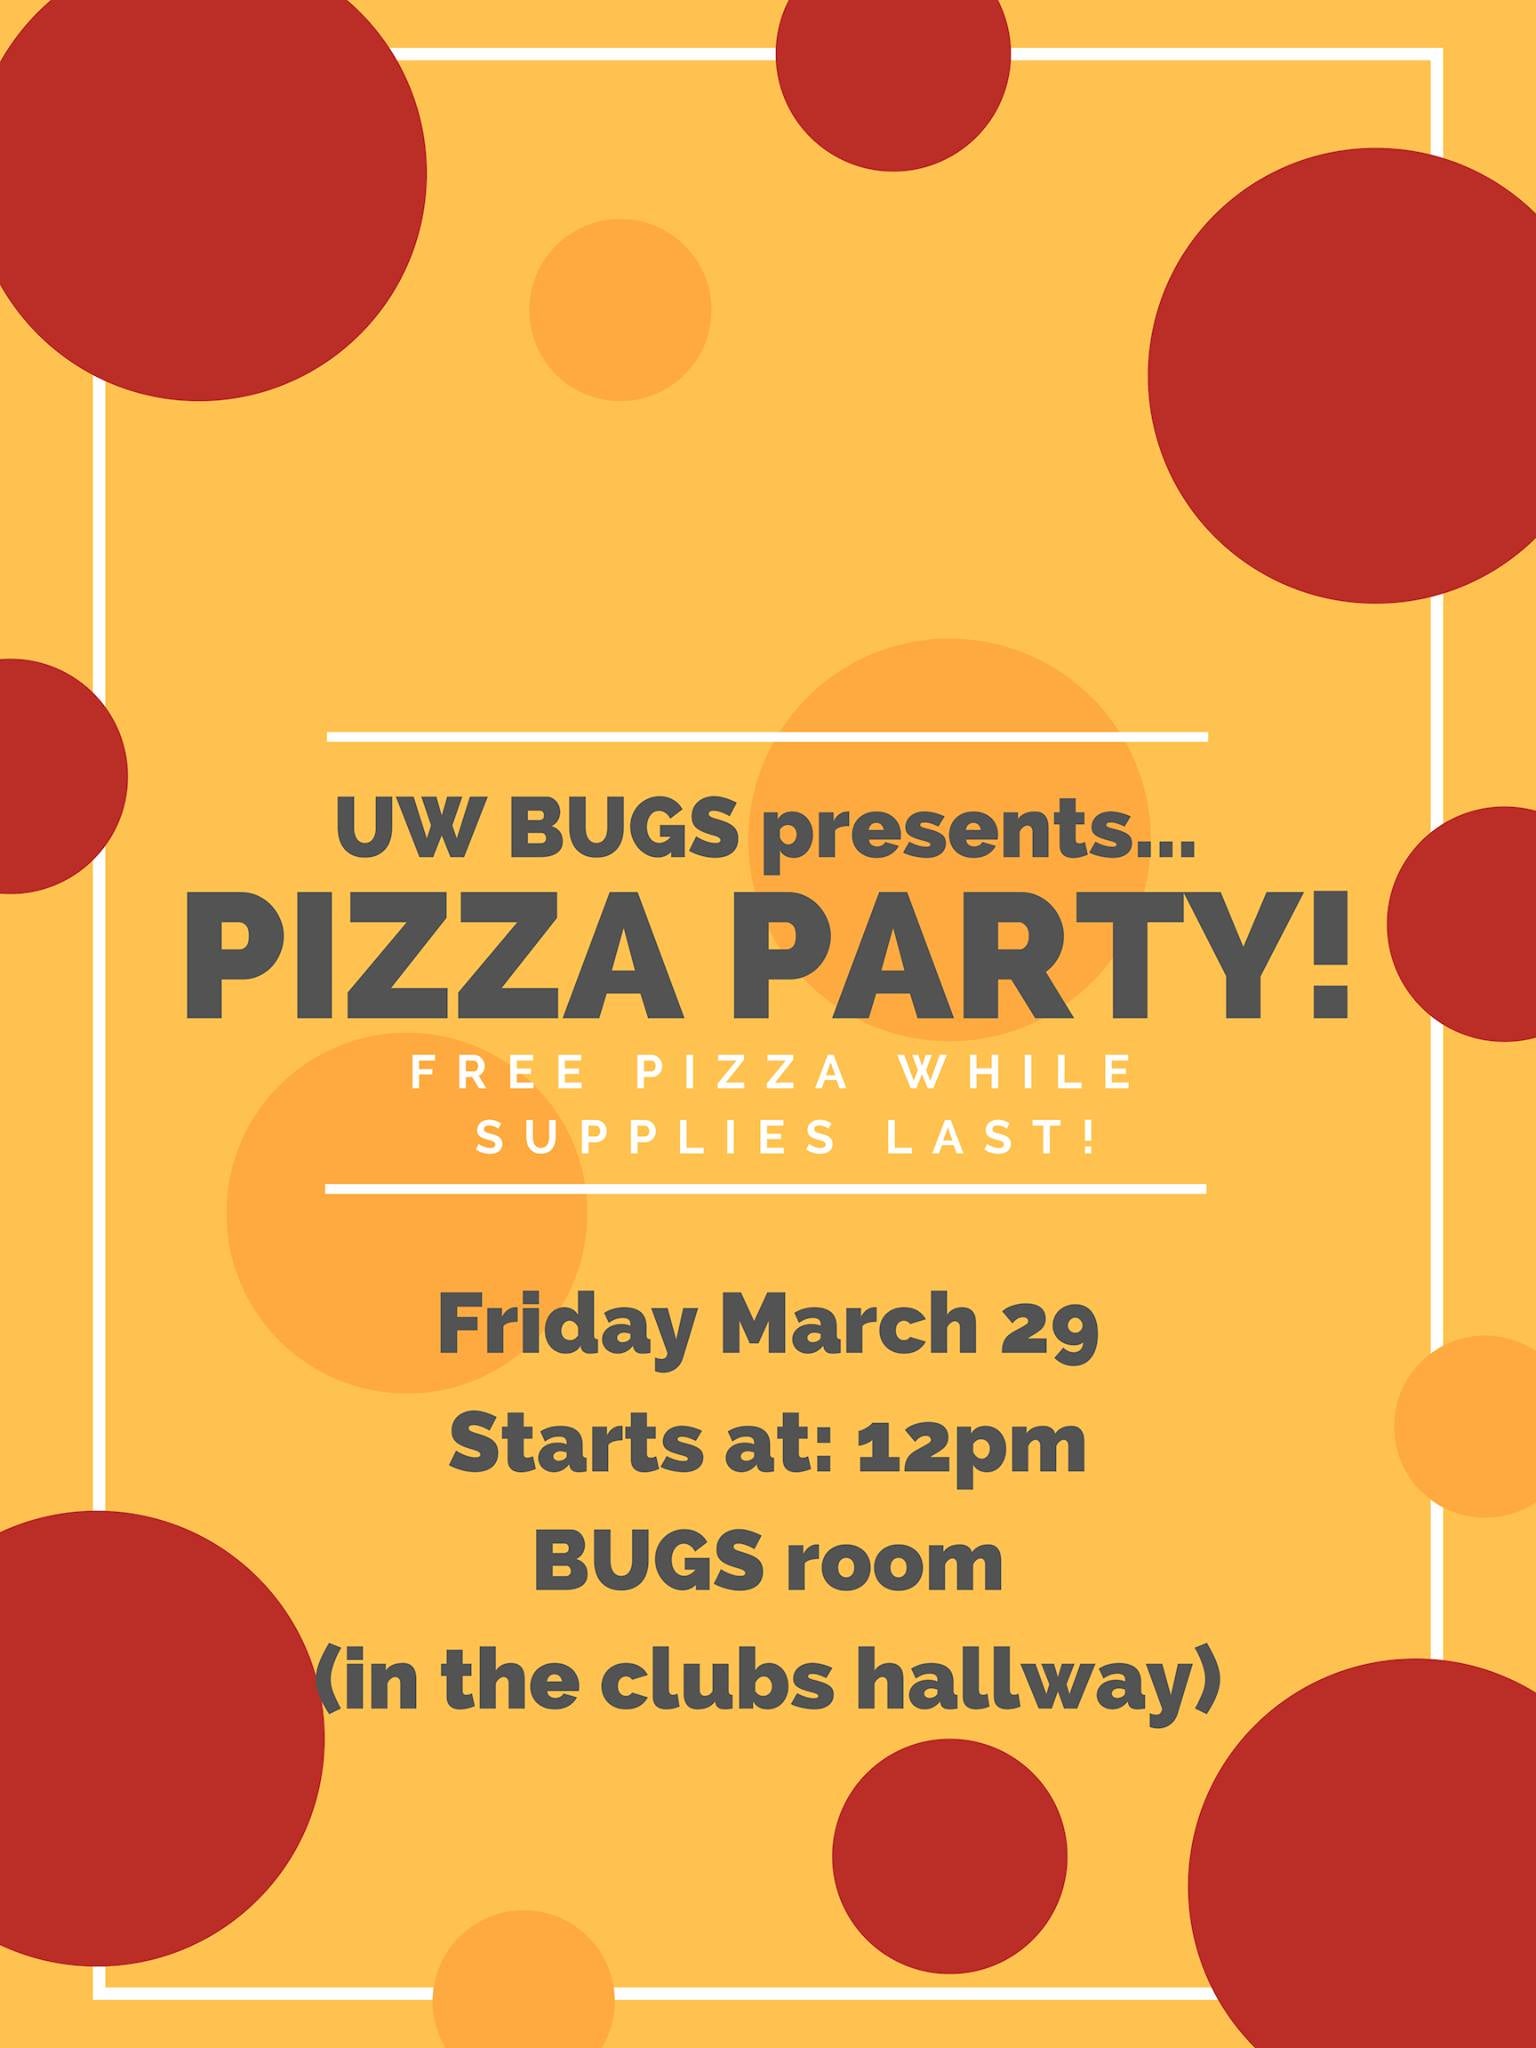 BUGS pizza party March 29 at noon while supplies last